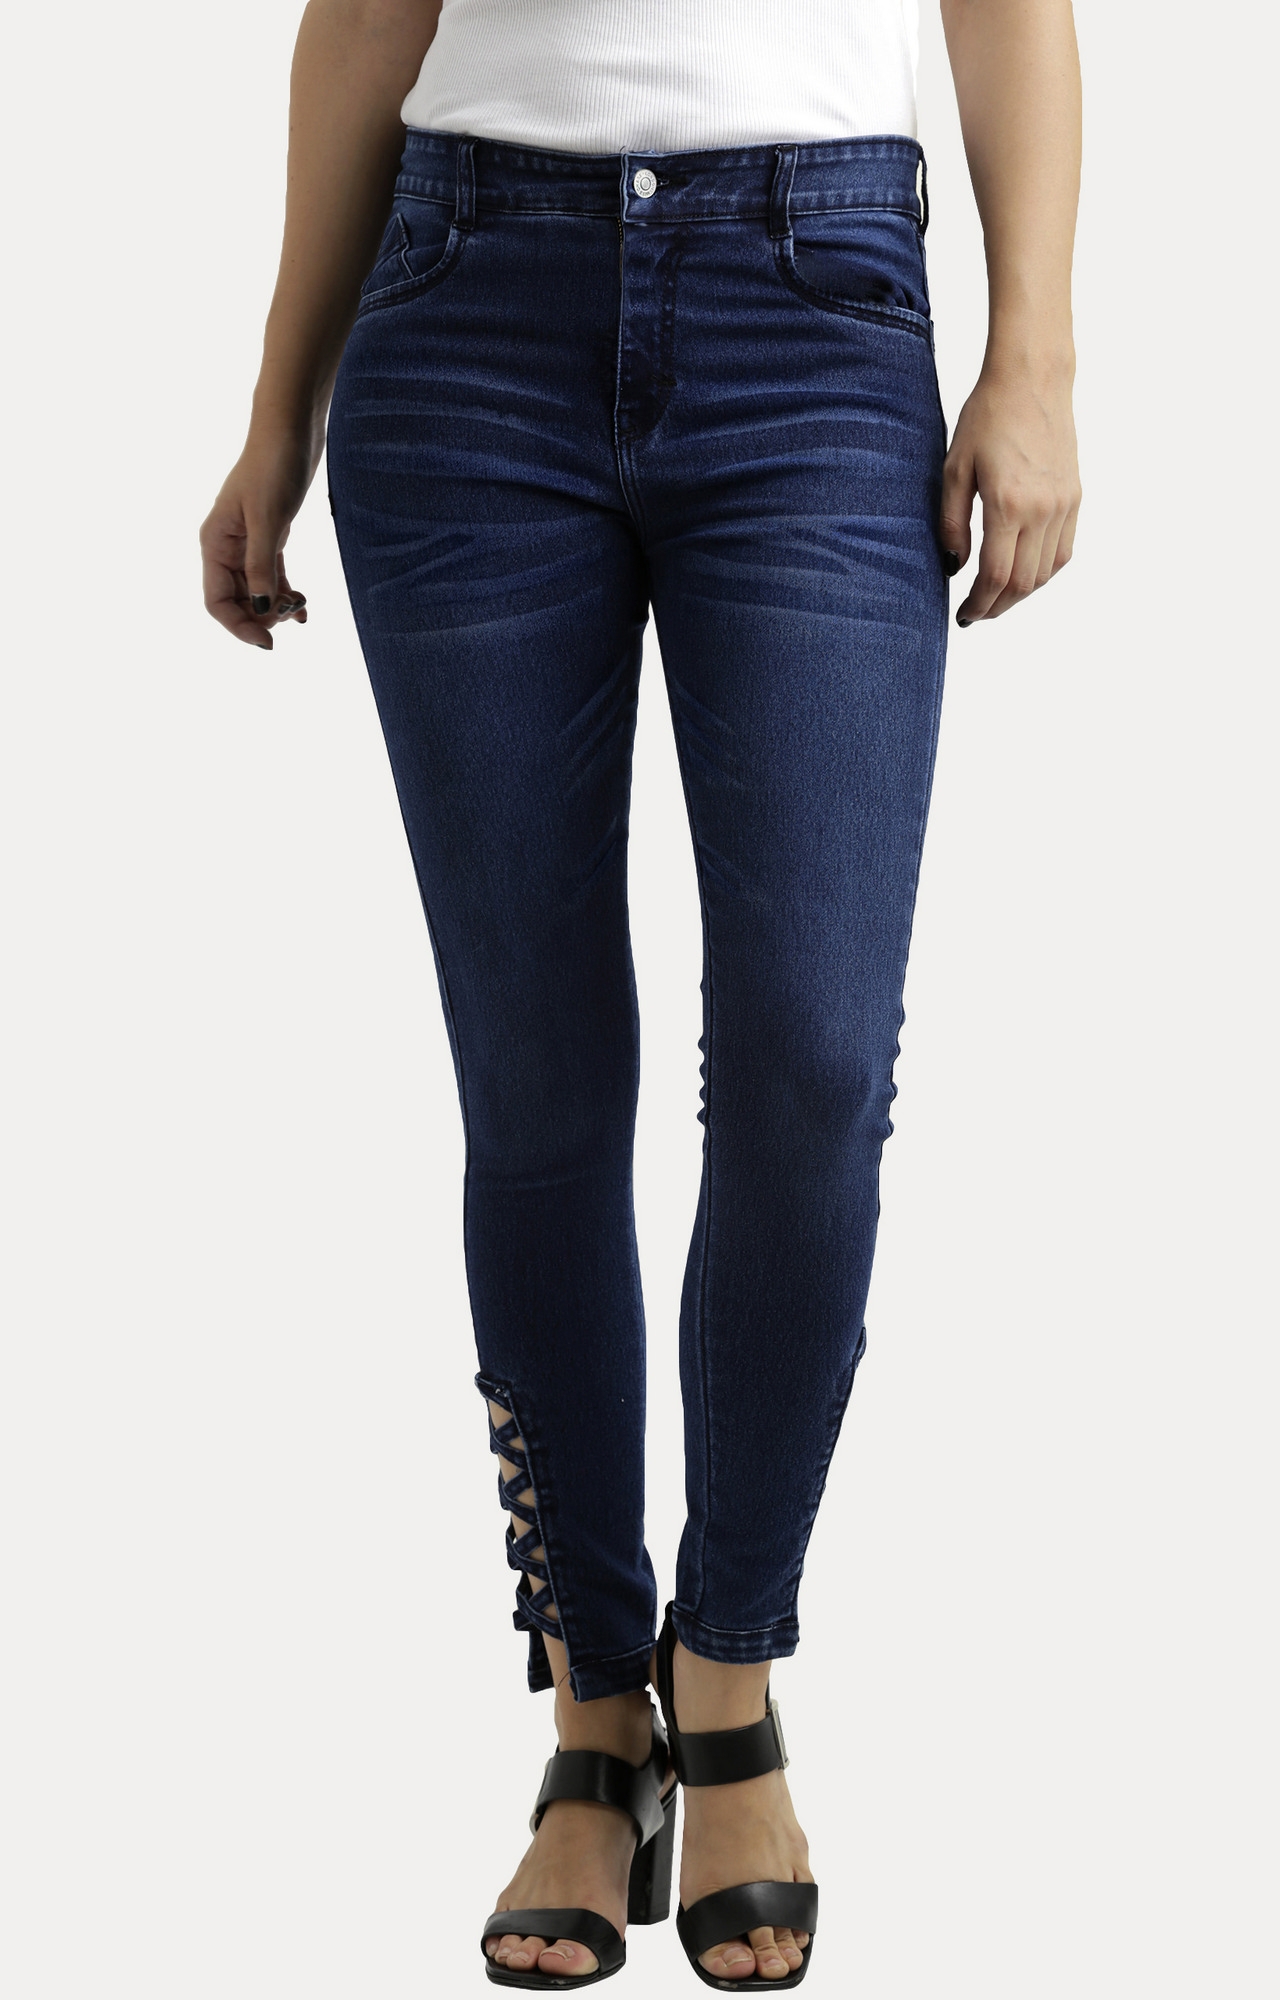 MISS CHASE | Navy Blue Criss Cross Stretchable Jeans